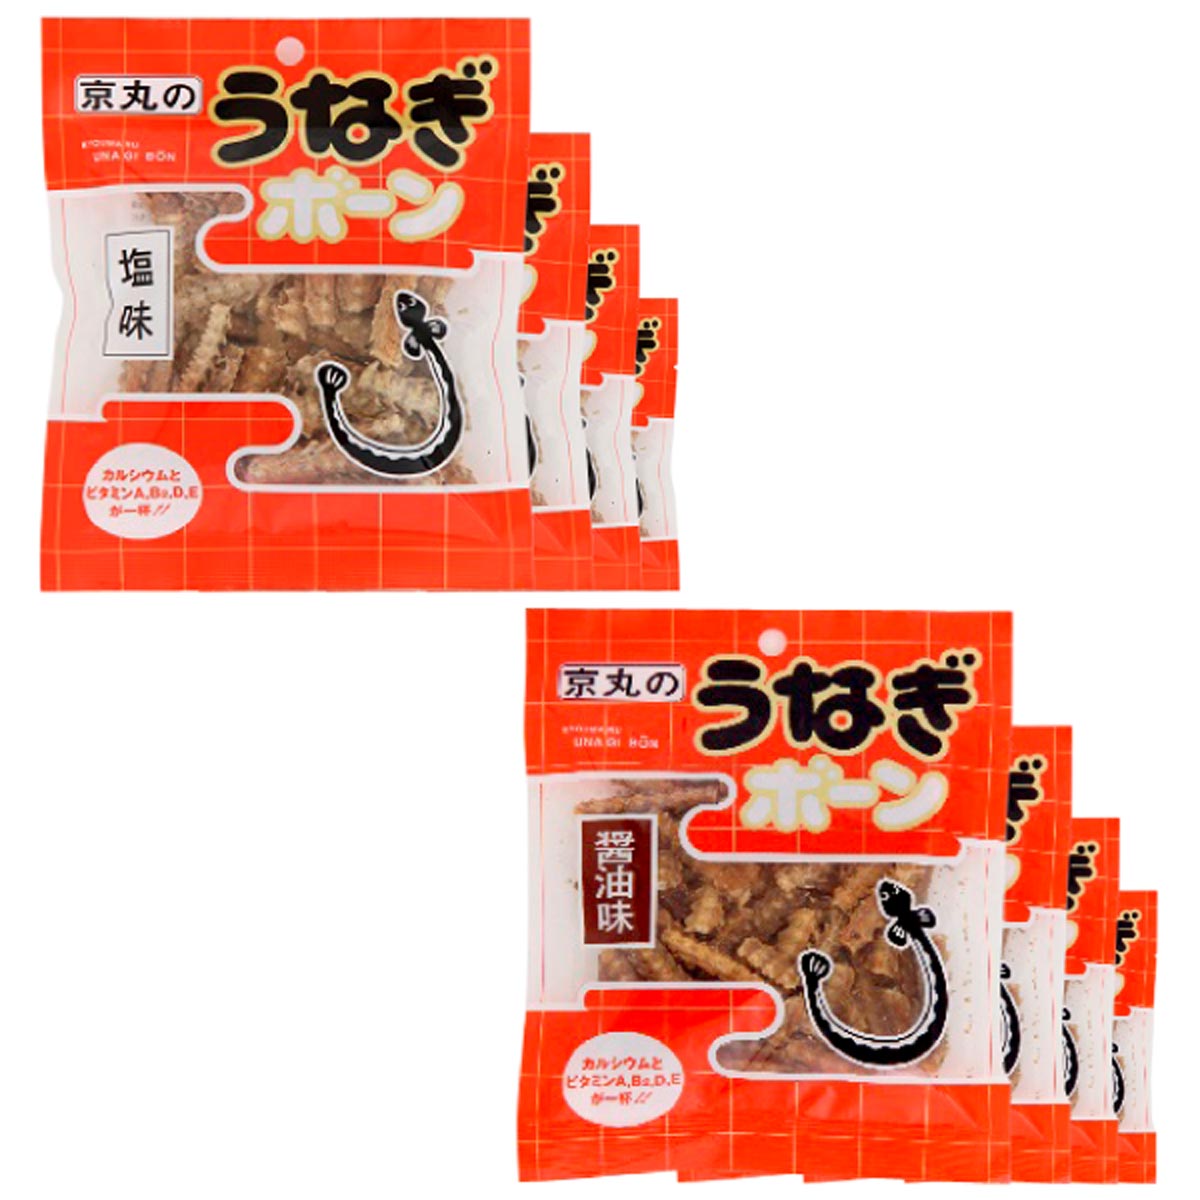 <strong>うなぎ</strong><strong>ボーン</strong> <strong>うなぎ</strong>骨せんべい 塩味26g×4袋+醤油味26g×4袋セット <strong>京丸</strong>【メール便 送料無料】【ギフト包装不可】【代引不可】 ウナギ<strong>ボーン</strong>